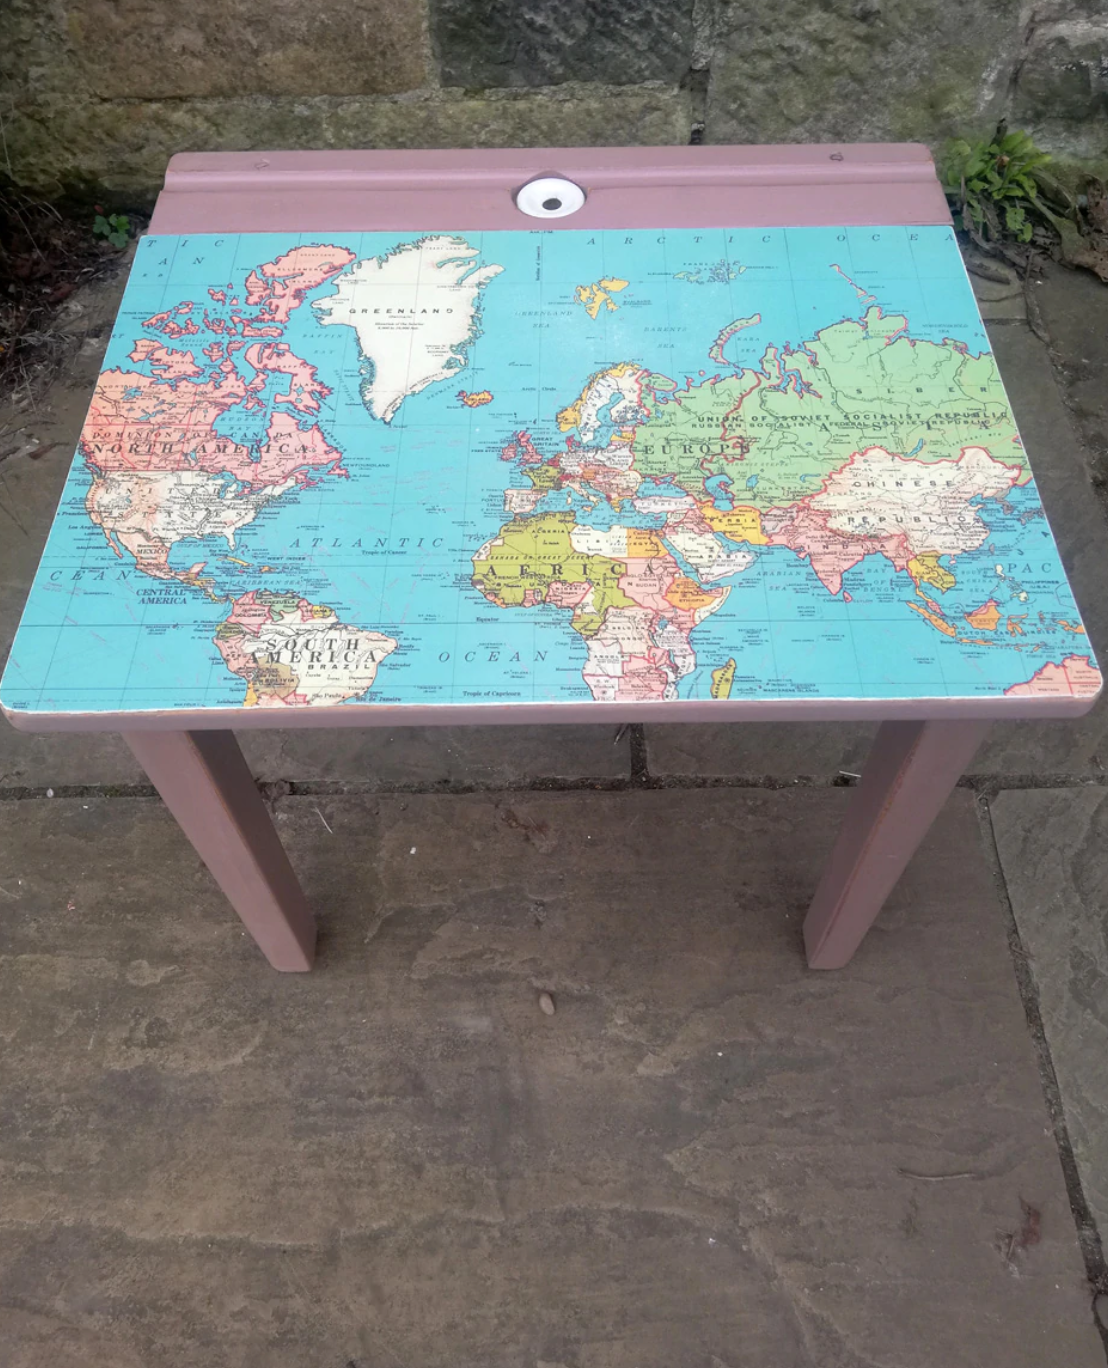 Painted and decoupaged vintage children's school desks, chairs or sets you choose design and colours